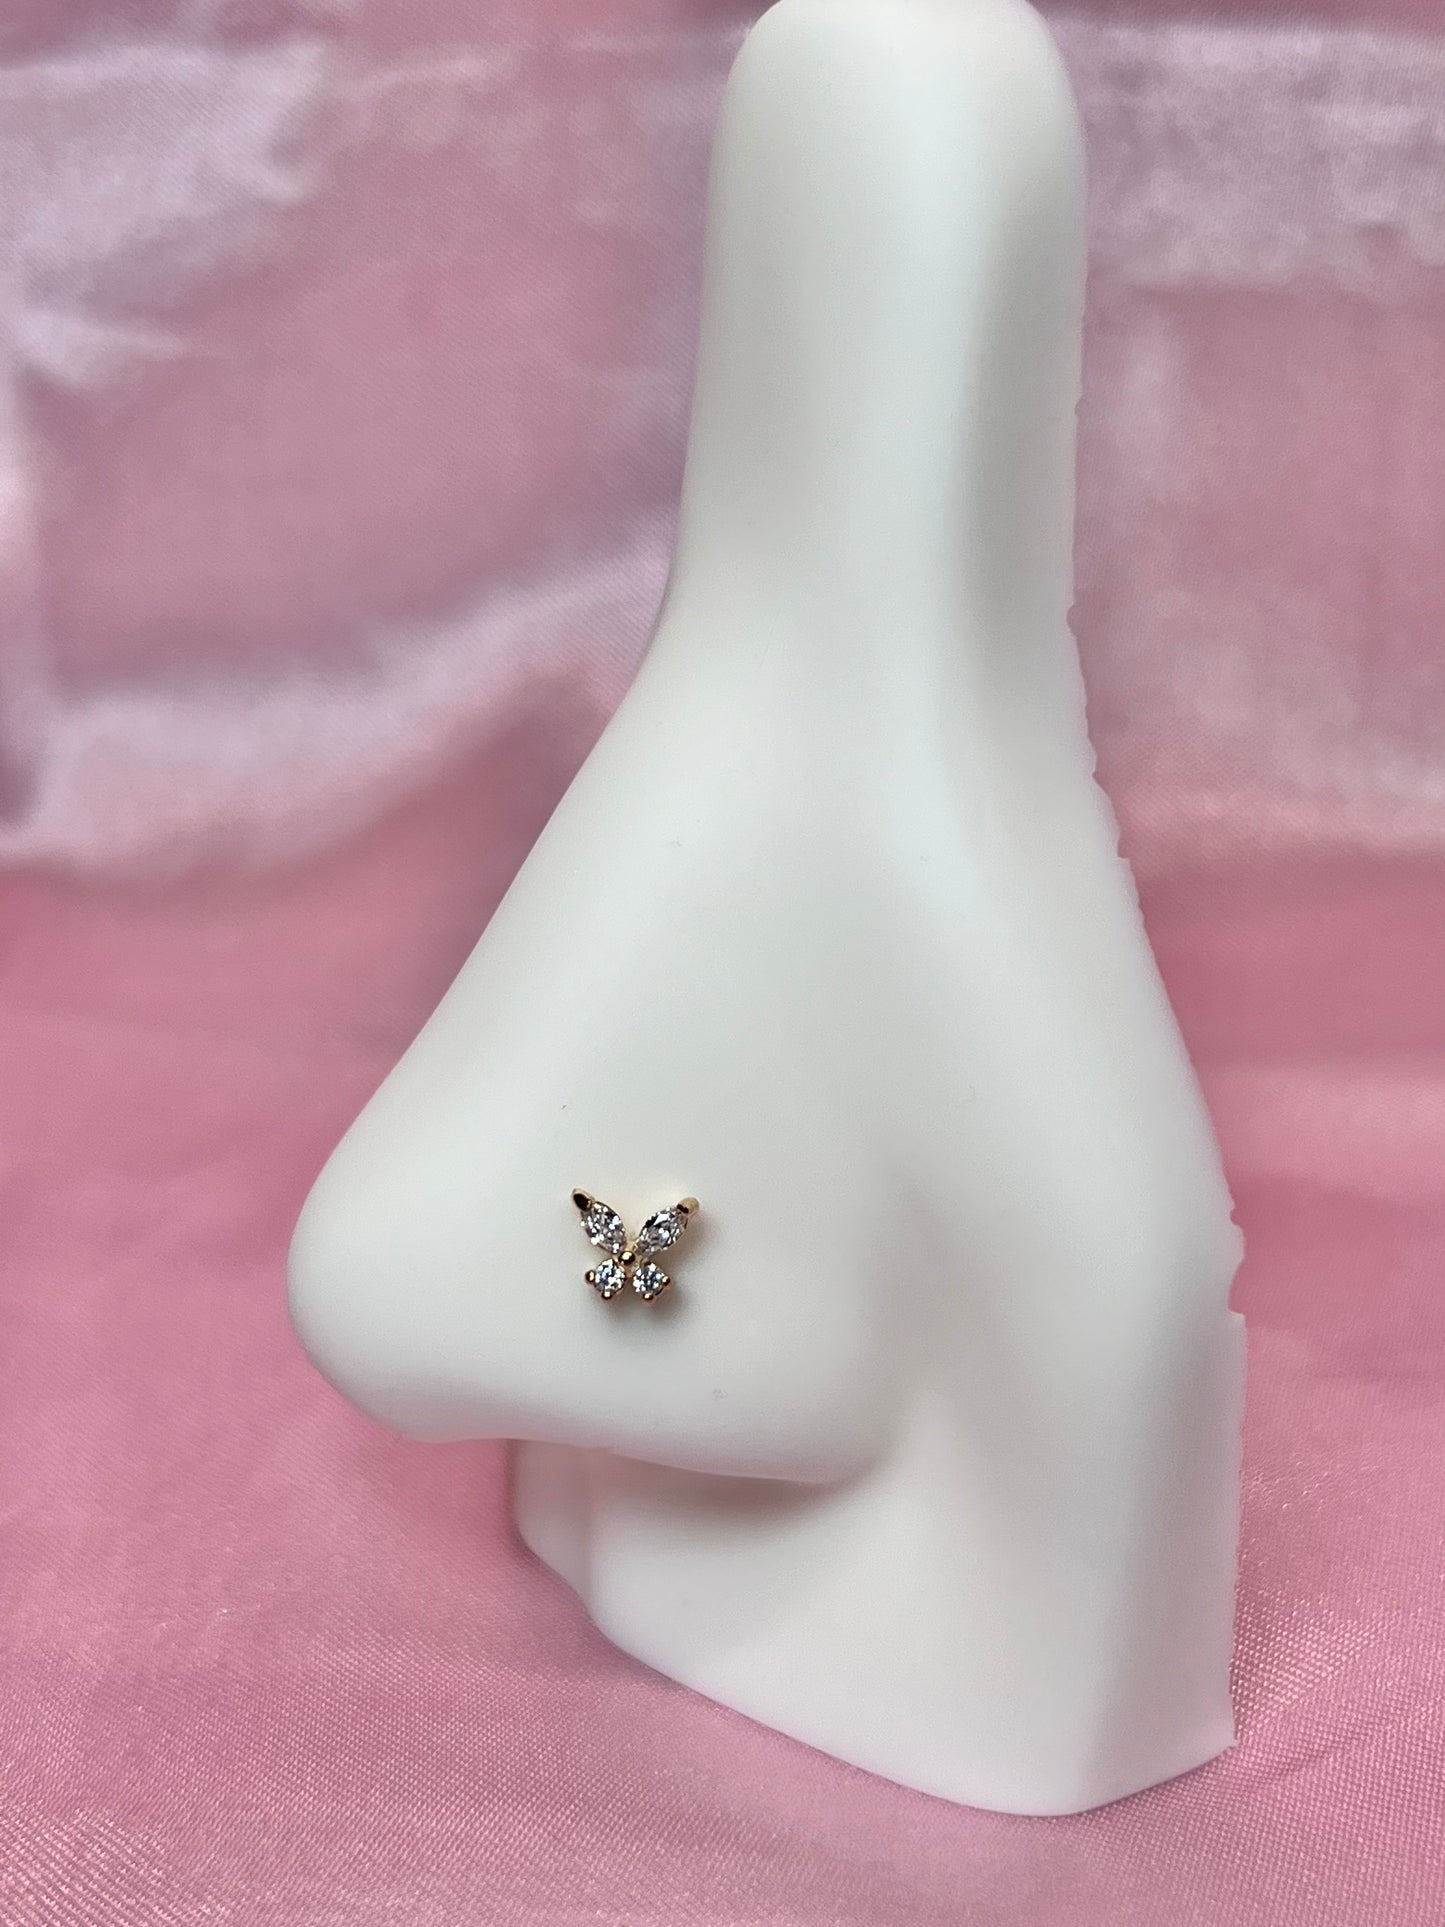 Tracy butterfly nose ring